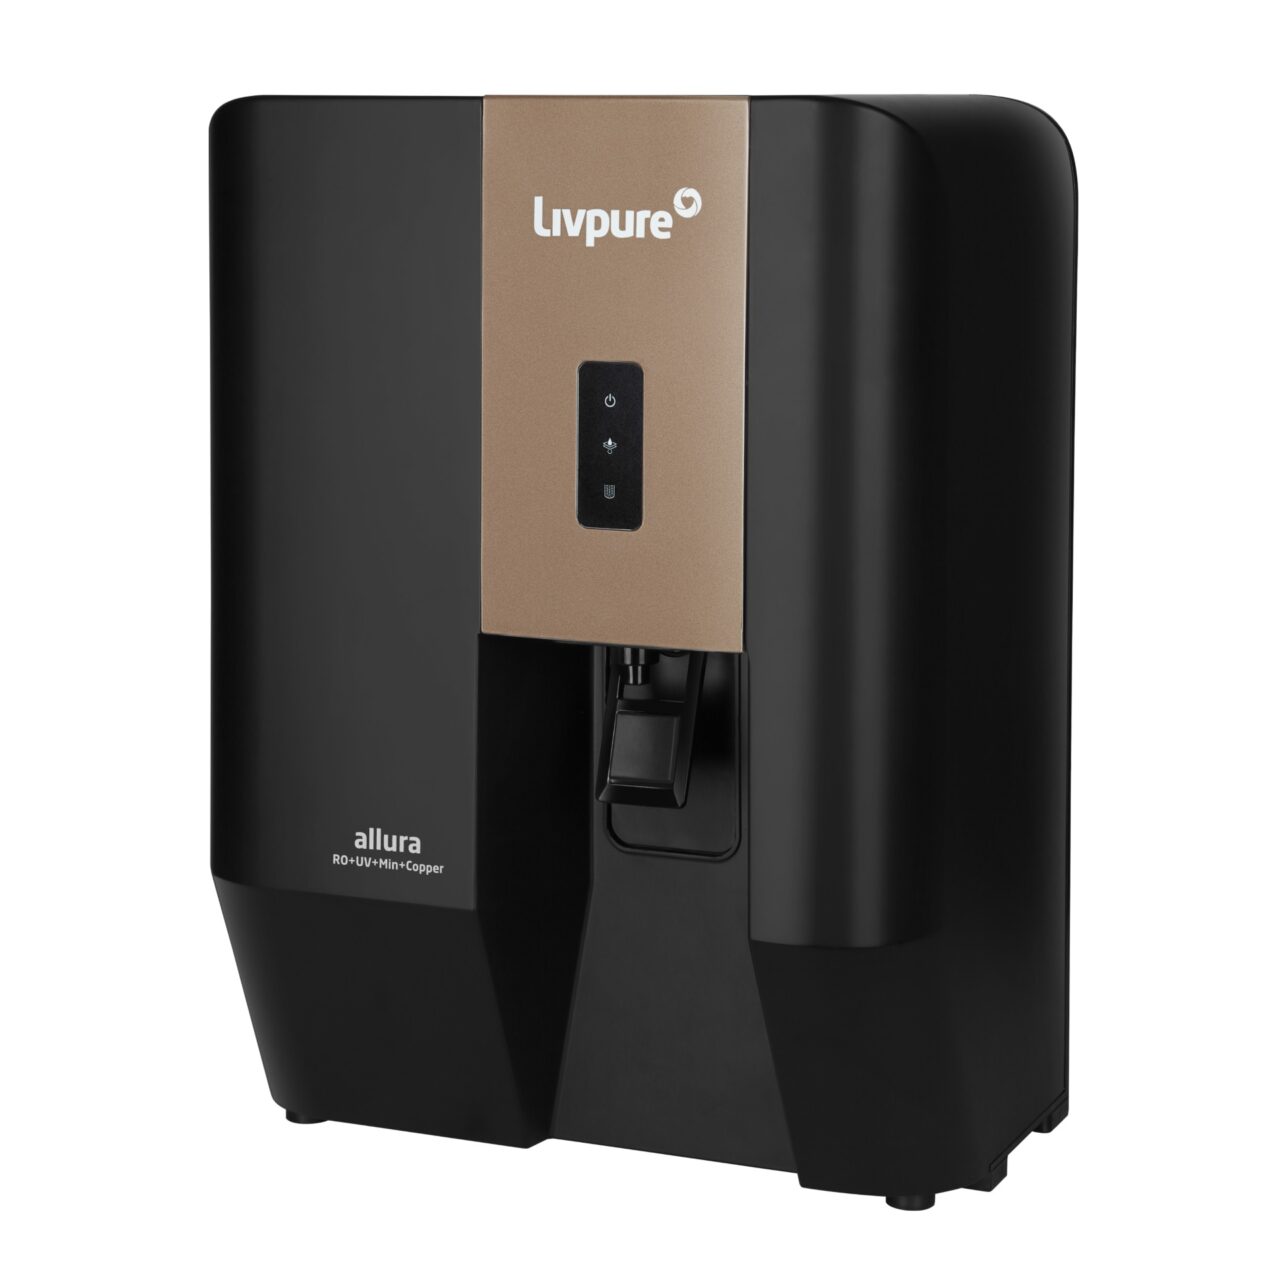 Livpure Launches Allura Water Purifiers with Extended Warranty